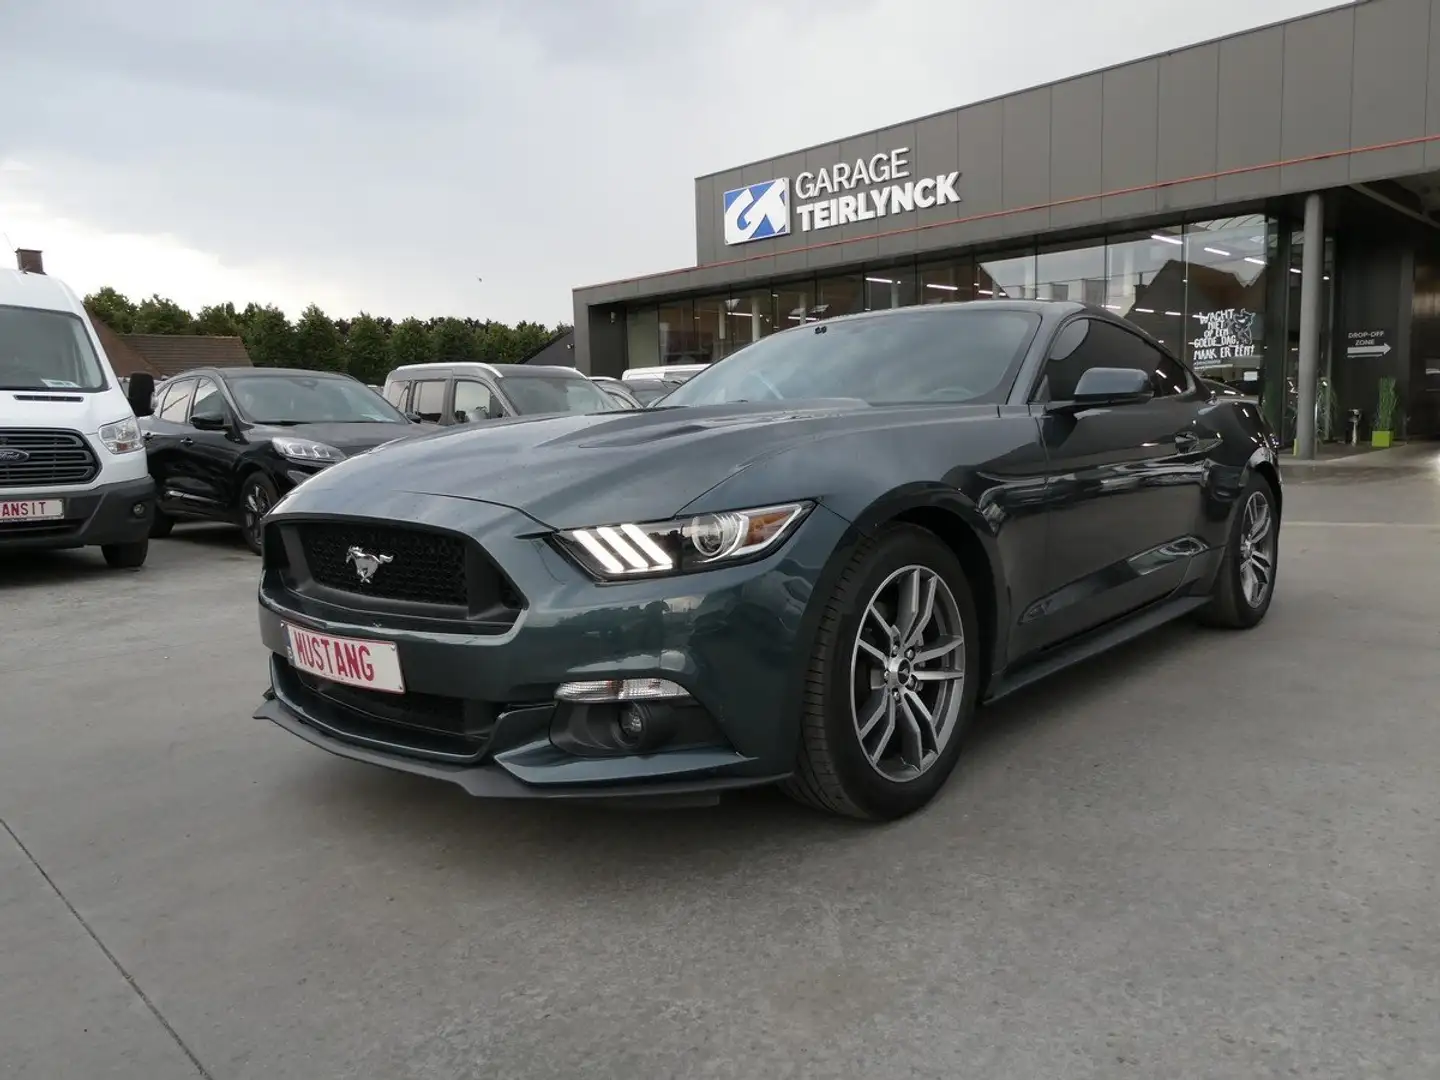 Ford Mustang Coupe Automaat 2.3 i 317pk '15 33000km (48593) Vert - 1